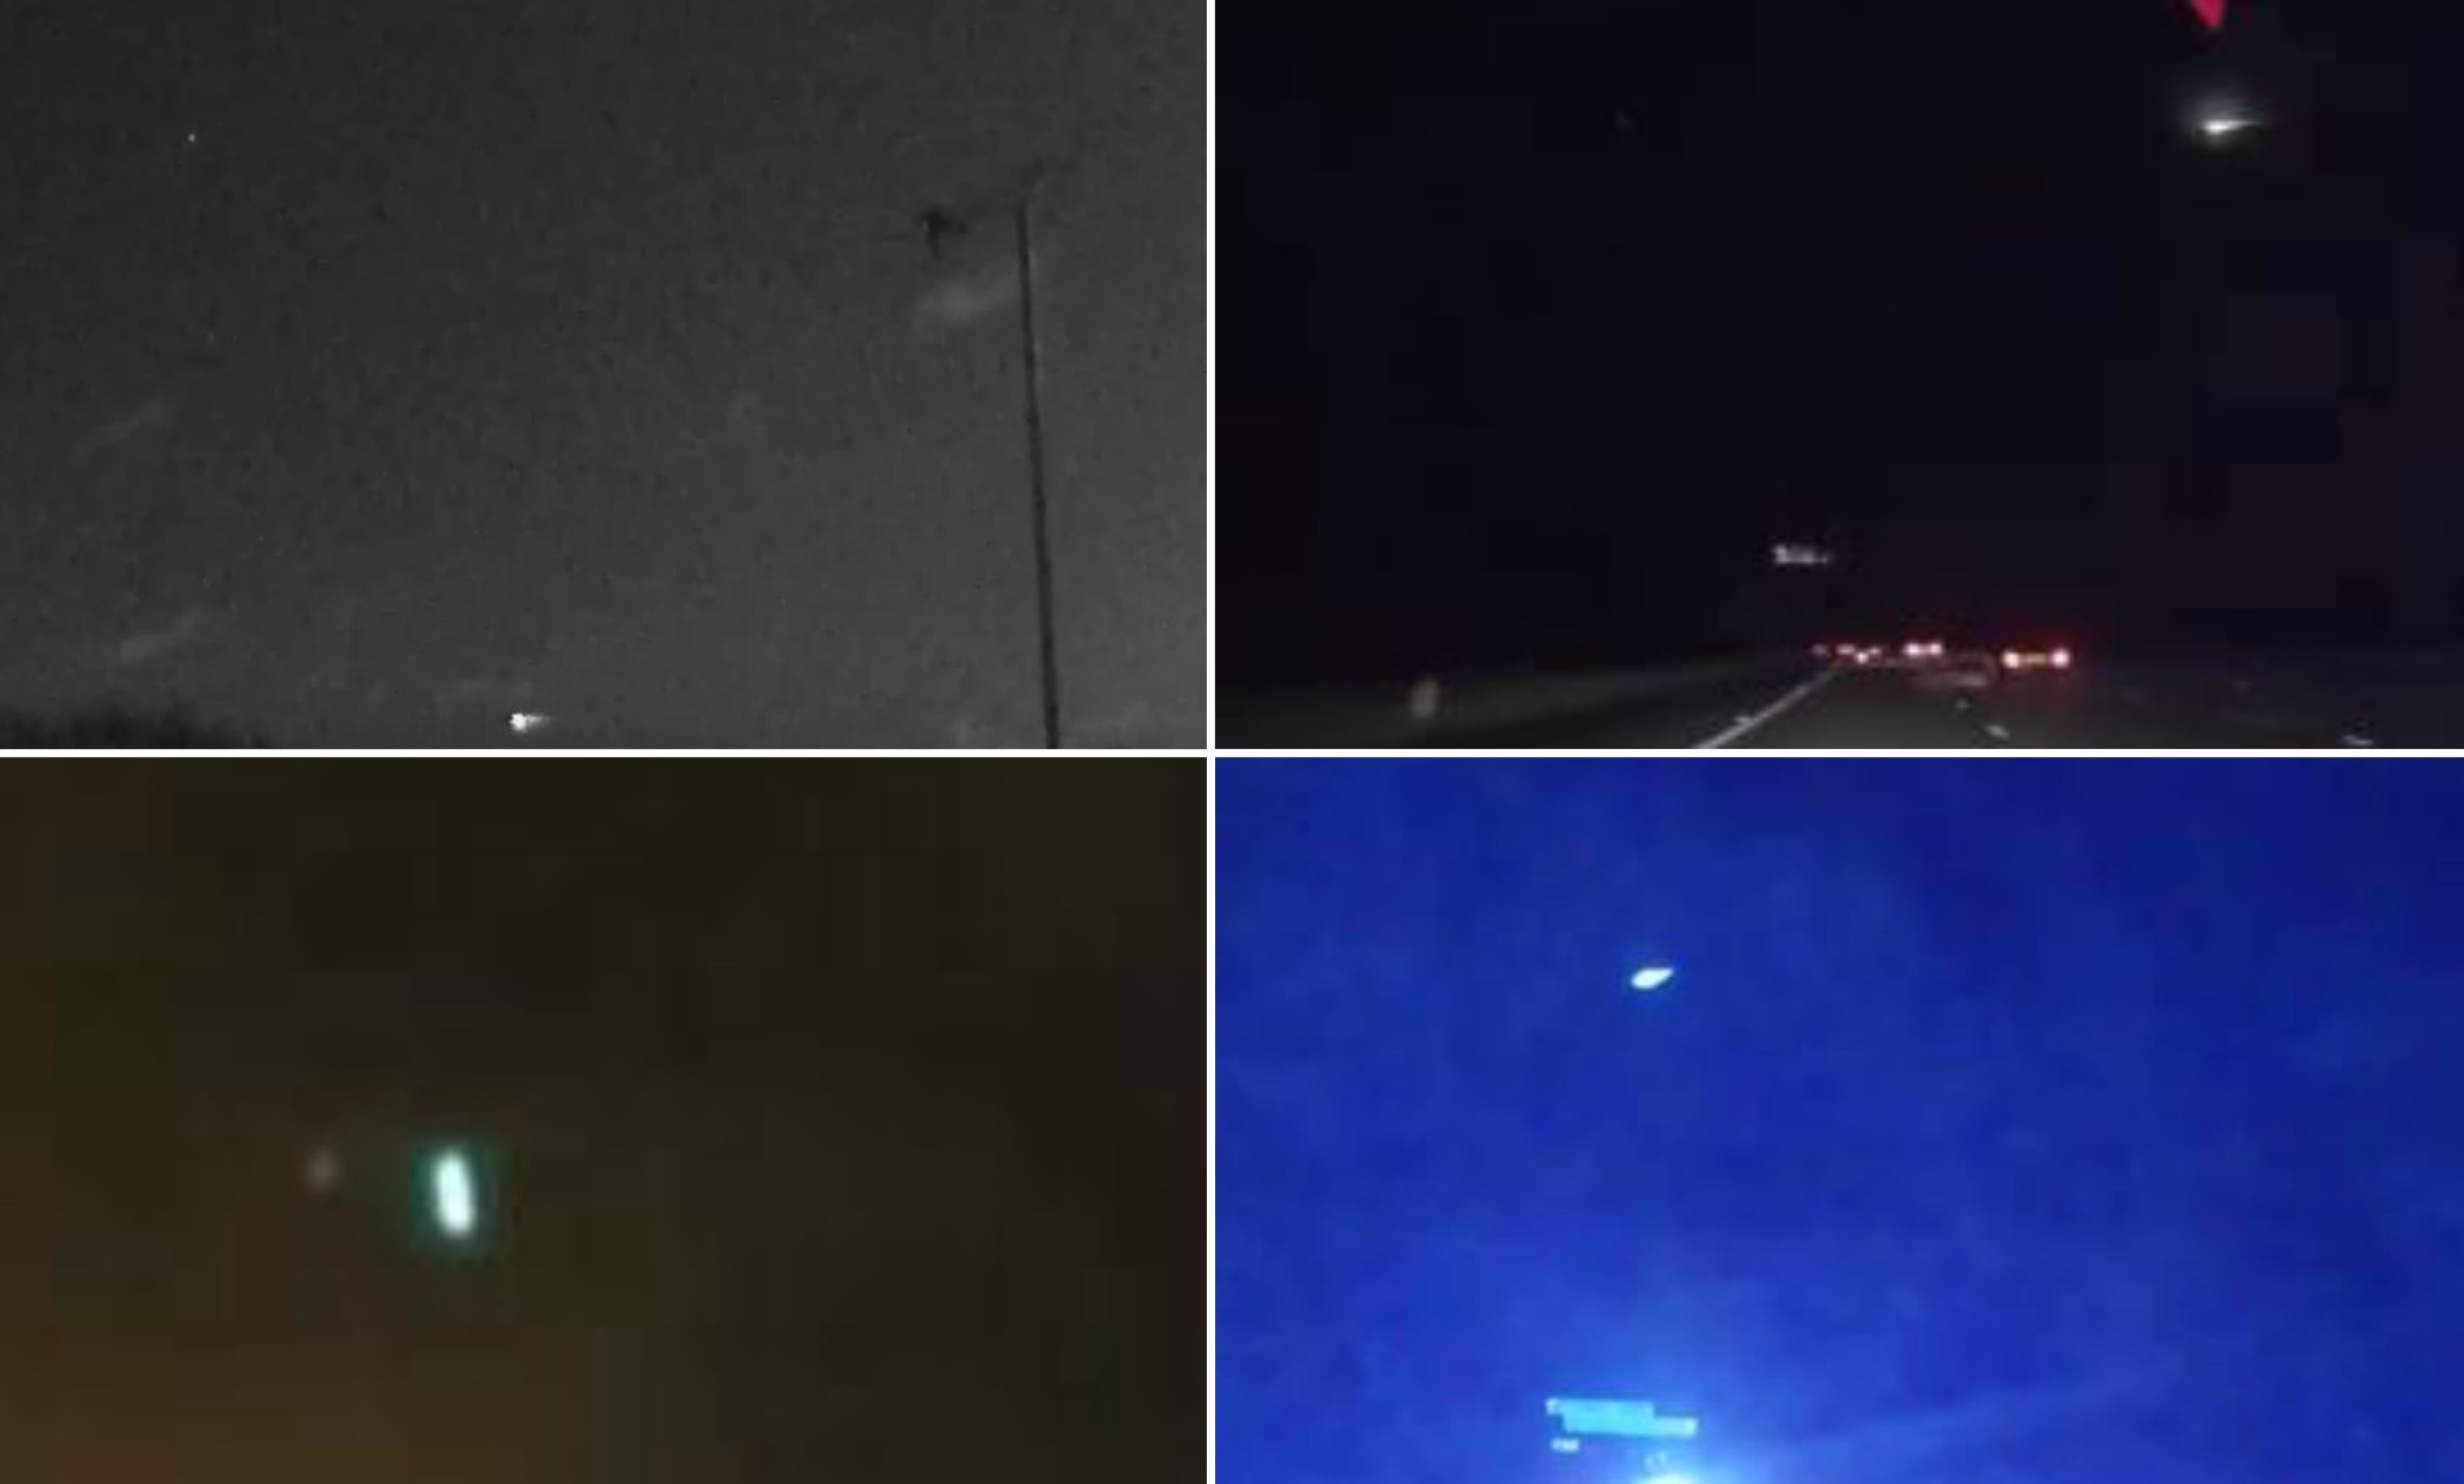 Footage of the meteor from across the UK. Uploaded by: the UK Meteor Observation Network Youtube, Jim Rowe - top left; Martin Kempson - Twitter, top right;
the Evening Express Youtube via Charlie Western, bottom left; and Graftin Geeza,  Youtube - bottom right.